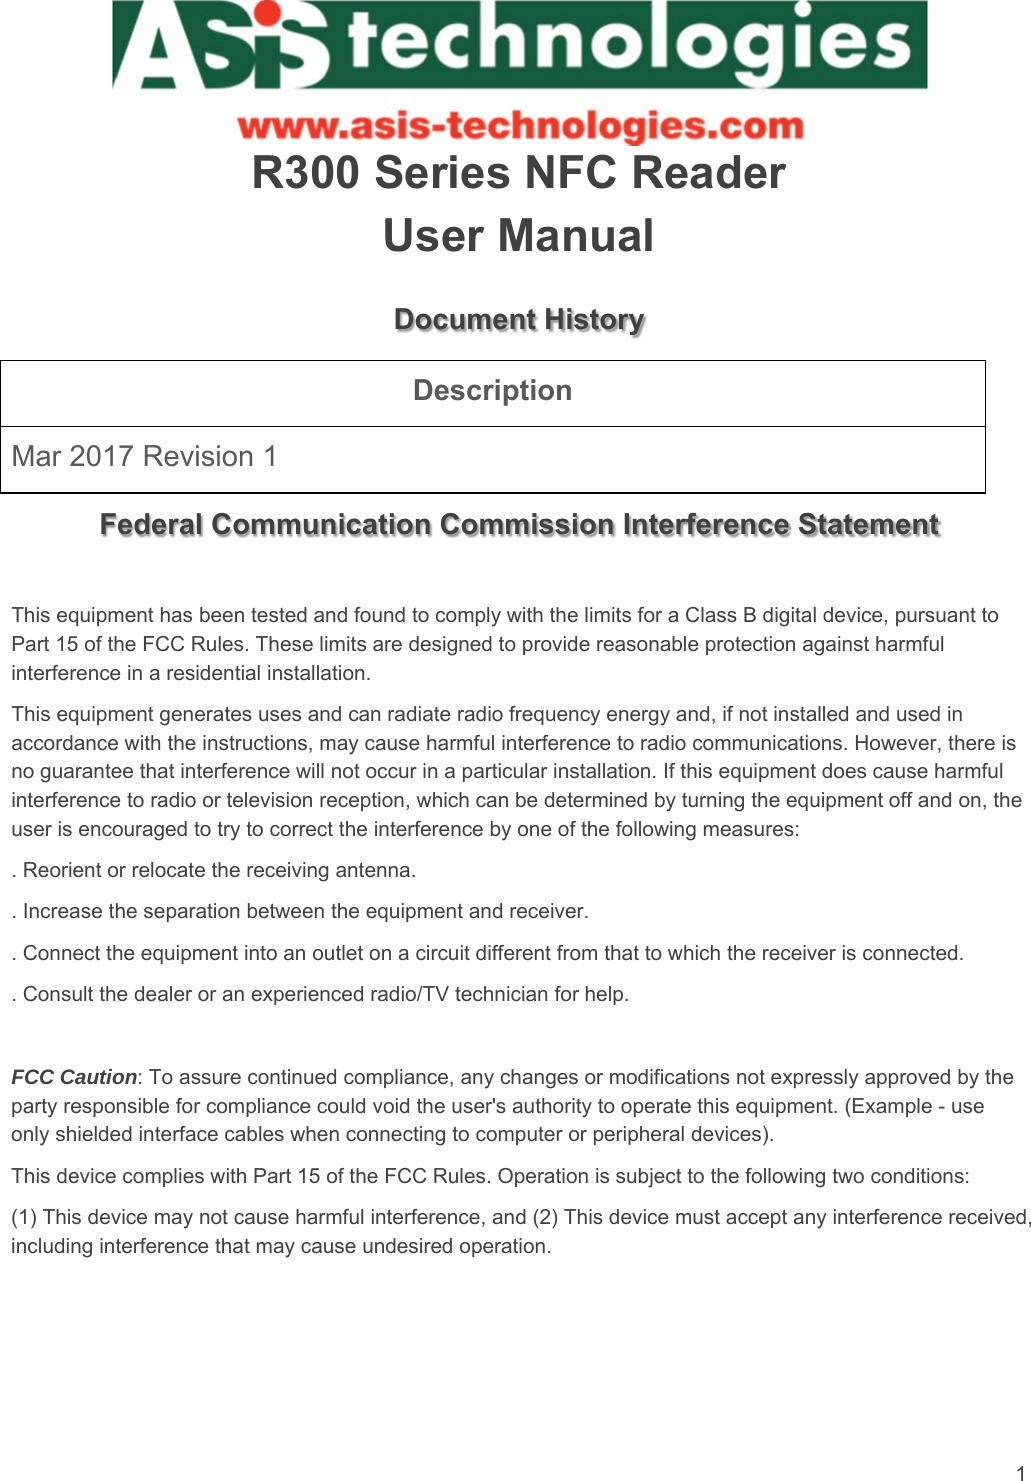 1   R300 Series NFC Reader User Manual Document History Description Mar 2017 Revision 1  Federal Communication Commission Interference Statement  This equipment has been tested and found to comply with the limits for a Class B digital device, pursuant to Part 15 of the FCC Rules. These limits are designed to provide reasonable protection against harmful interference in a residential installation. This equipment generates uses and can radiate radio frequency energy and, if not installed and used in accordance with the instructions, may cause harmful interference to radio communications. However, there is no guarantee that interference will not occur in a particular installation. If this equipment does cause harmful interference to radio or television reception, which can be determined by turning the equipment off and on, the user is encouraged to try to correct the interference by one of the following measures: . Reorient or relocate the receiving antenna. . Increase the separation between the equipment and receiver. . Connect the equipment into an outlet on a circuit different from that to which the receiver is connected. . Consult the dealer or an experienced radio/TV technician for help.  FCC Caution: To assure continued compliance, any changes or modifications not expressly approved by the party responsible for compliance could void the user&apos;s authority to operate this equipment. (Example - use only shielded interface cables when connecting to computer or peripheral devices). This device complies with Part 15 of the FCC Rules. Operation is subject to the following two conditions: (1) This device may not cause harmful interference, and (2) This device must accept any interference received, including interference that may cause undesired operation.   